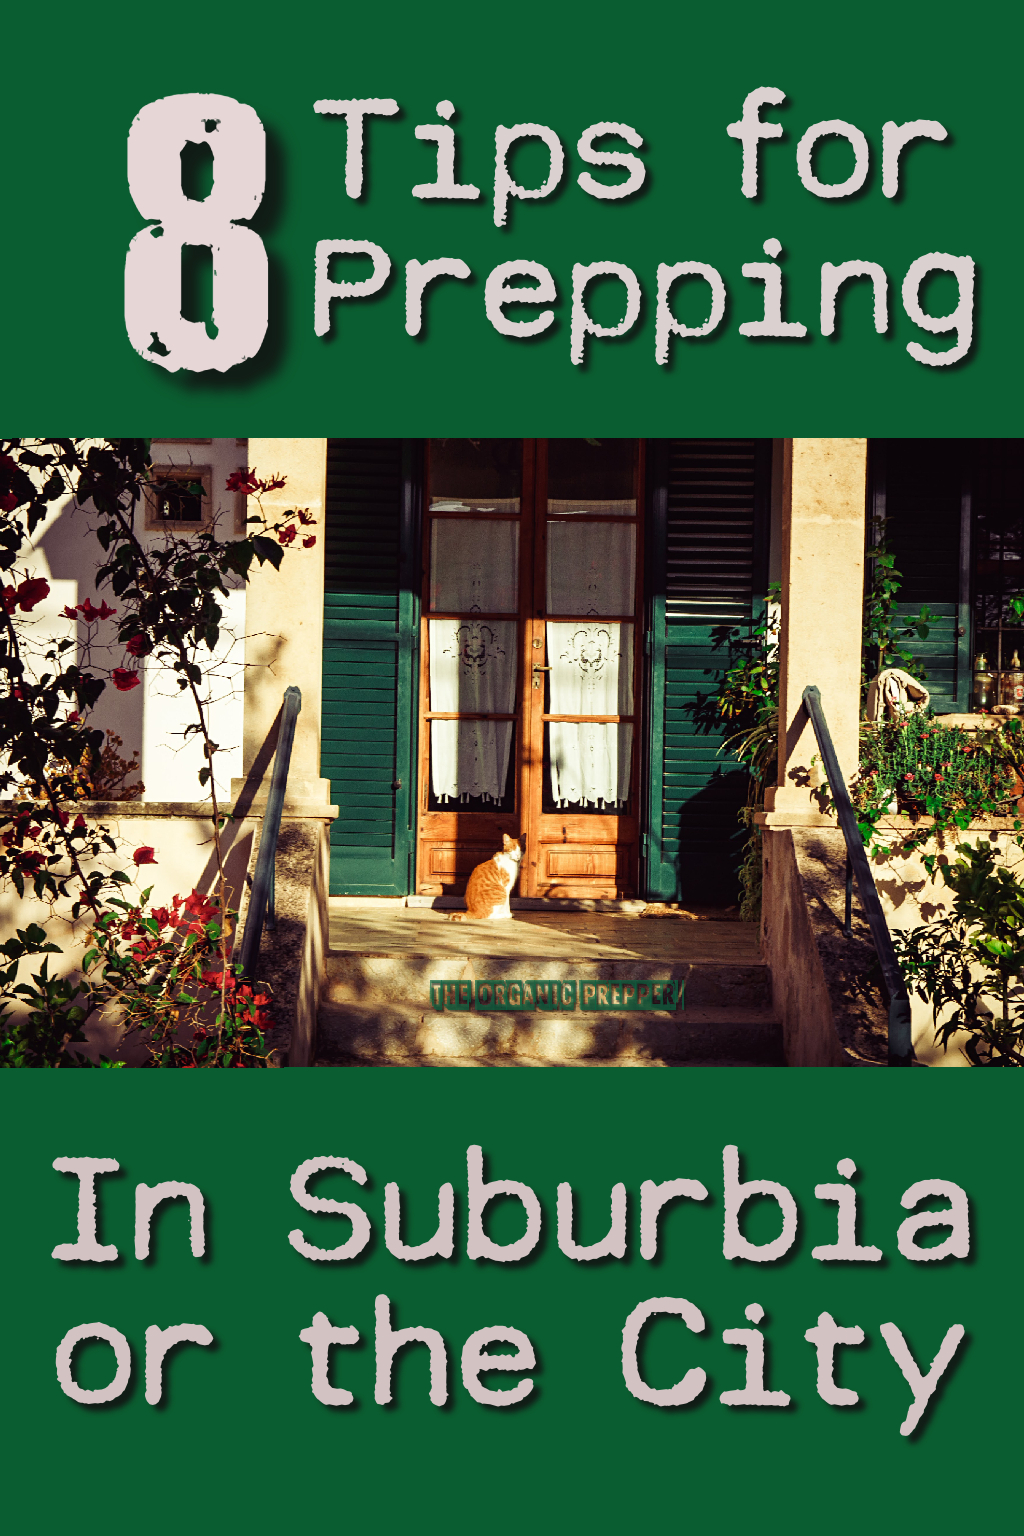 8 Tips for Prepping in Suburbia and the City